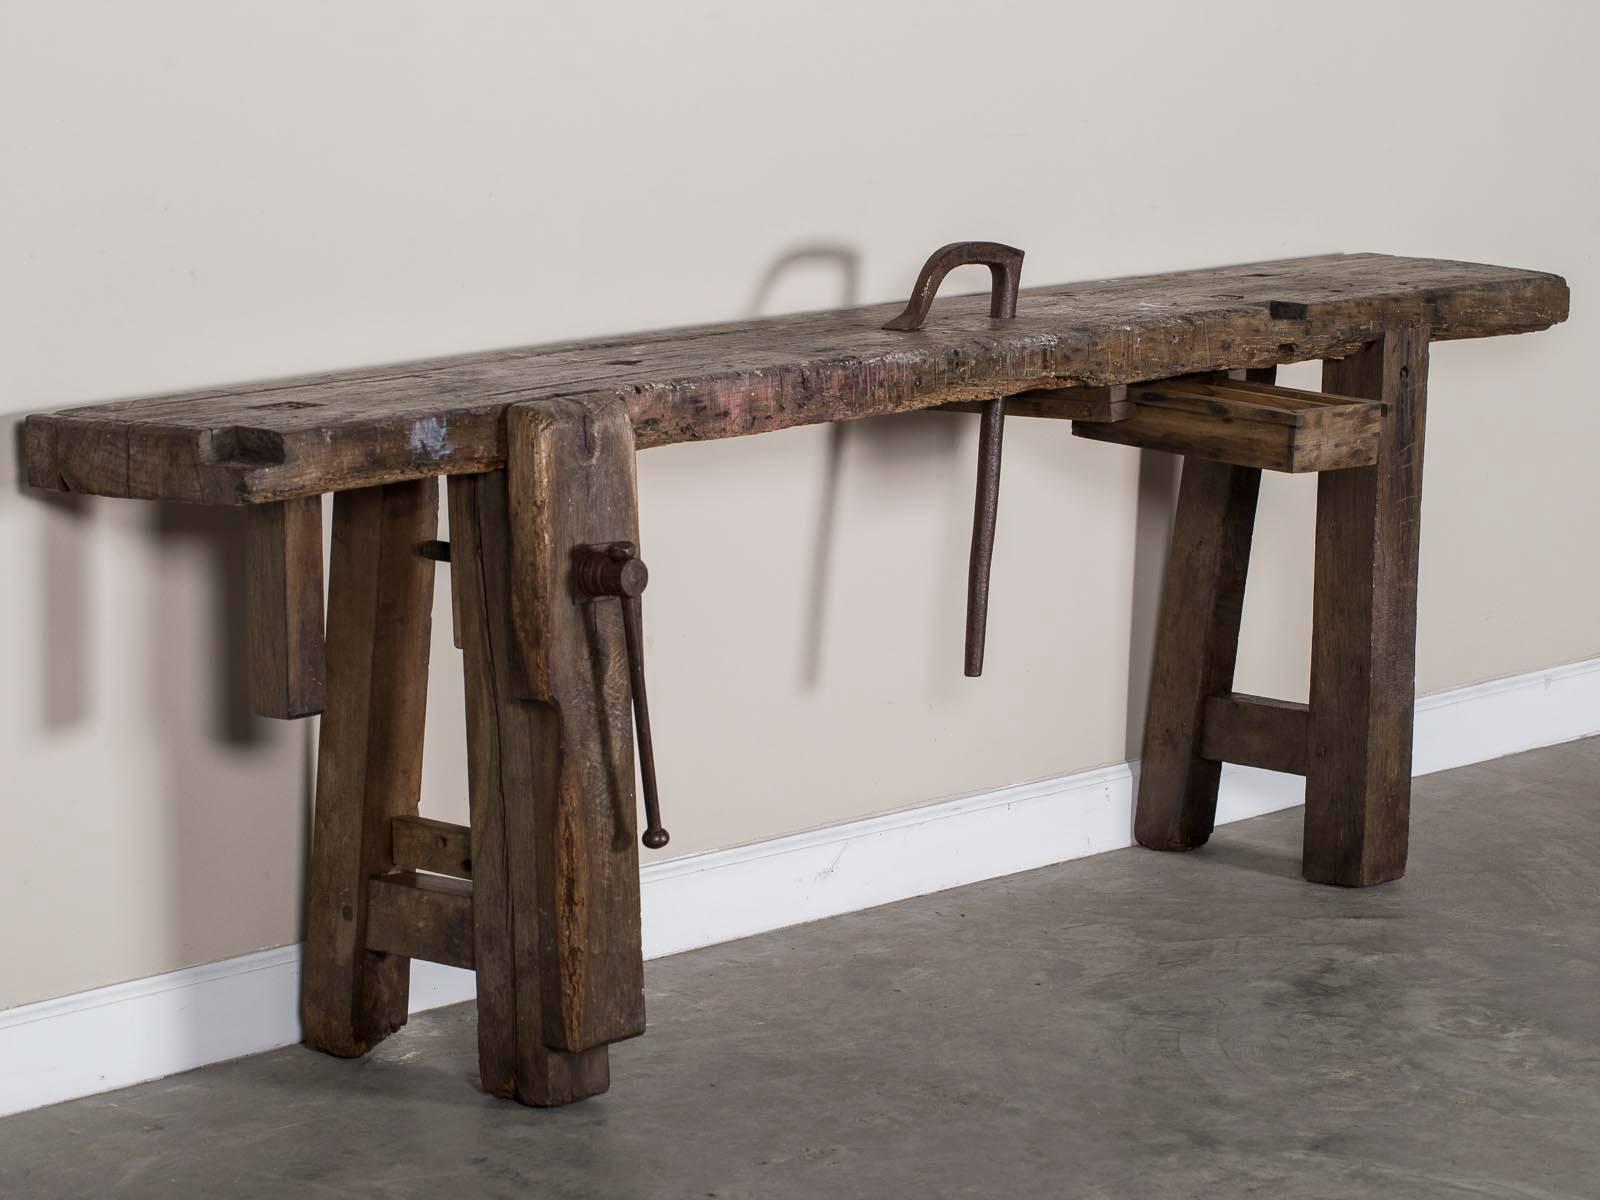 A wonderfully rough antique vintage French industrial solid oak workbench, circa 1900 with the original iron vise and removable iron guide. The sheer massive quality of the solid oak timber on this table is quite impressive. Originally designed and